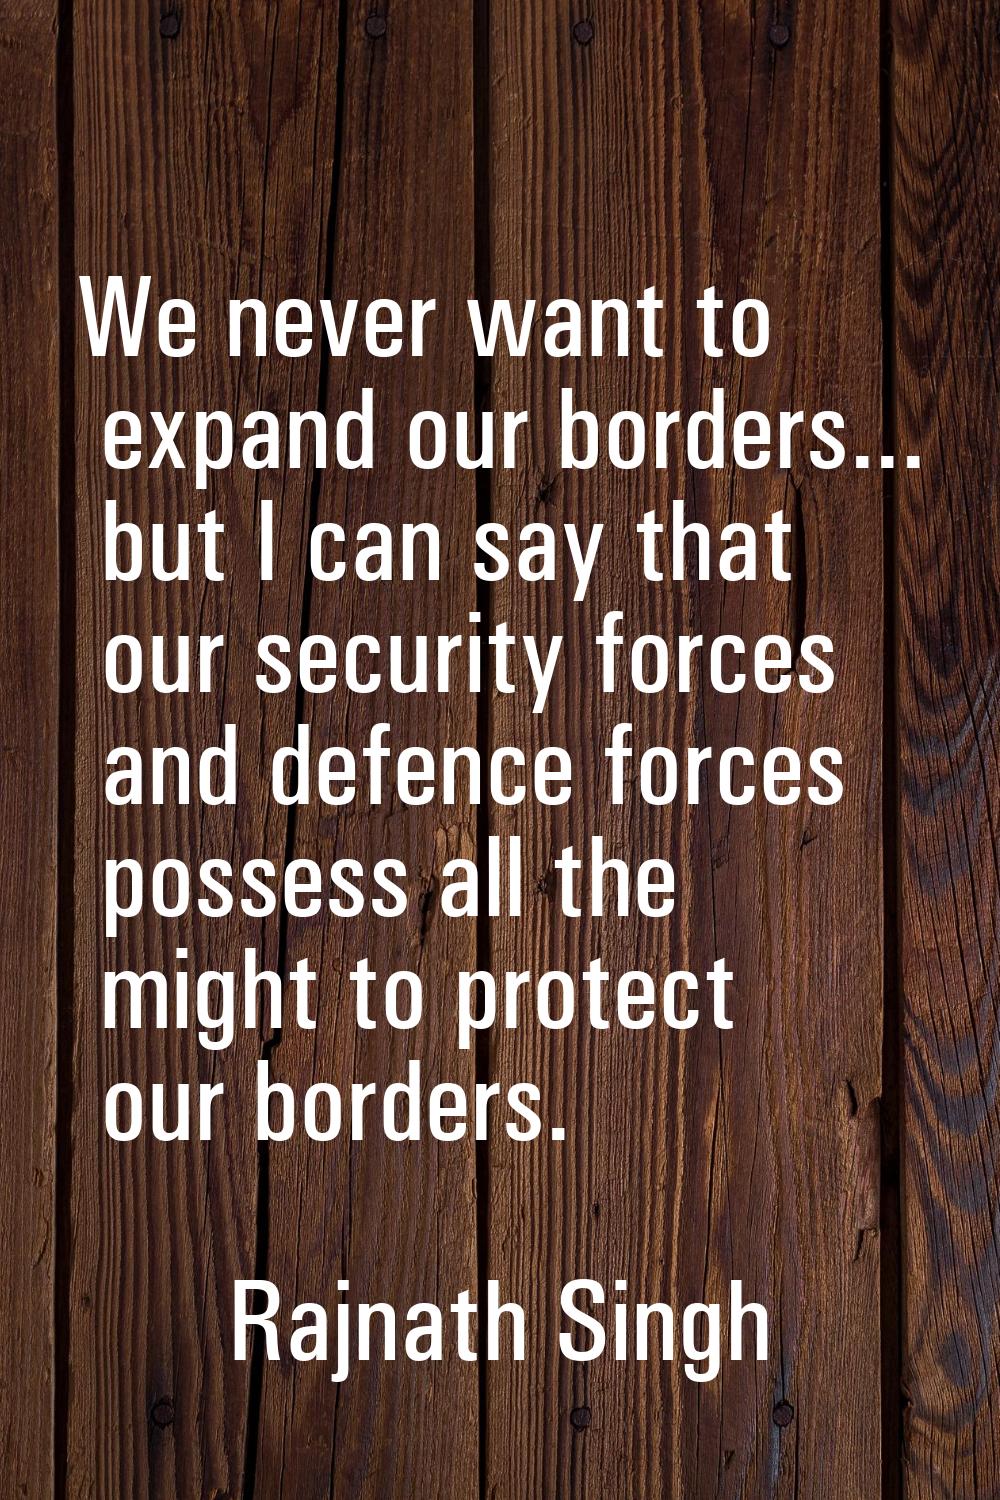 We never want to expand our borders... but I can say that our security forces and defence forces po